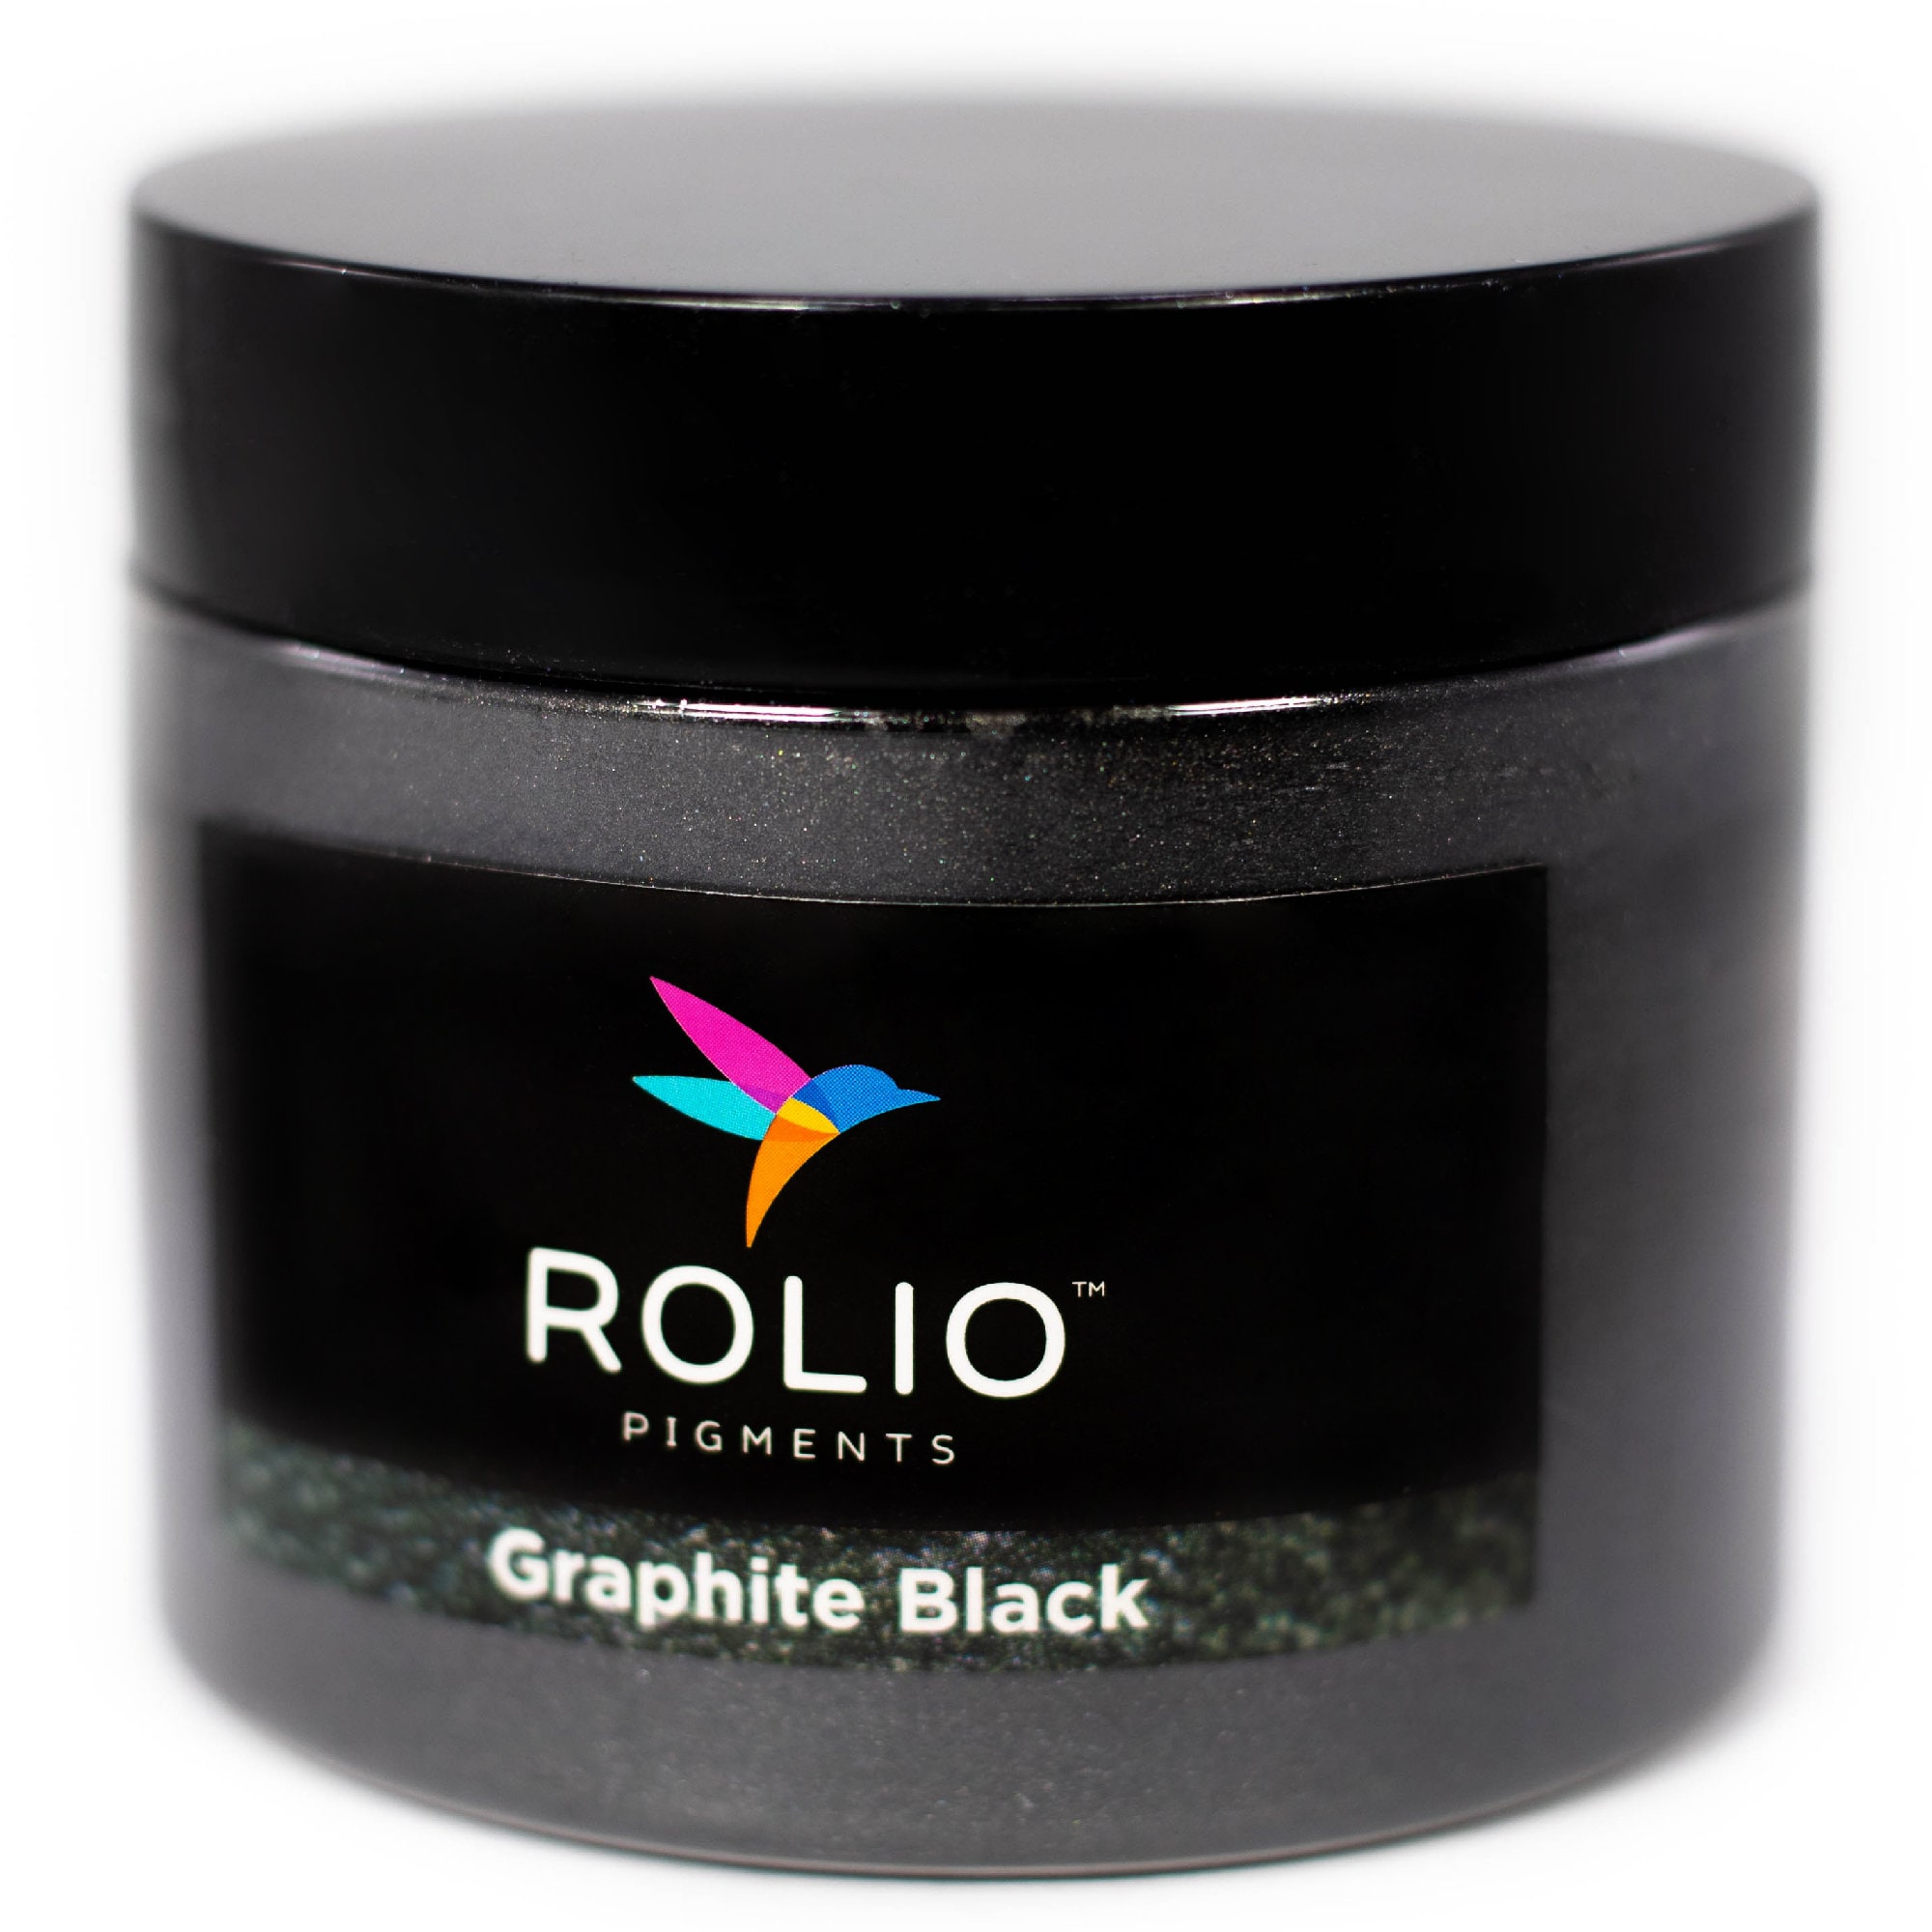 Charcoal Black Epoxy Resin Color Pigment - Mica Powder 50g by